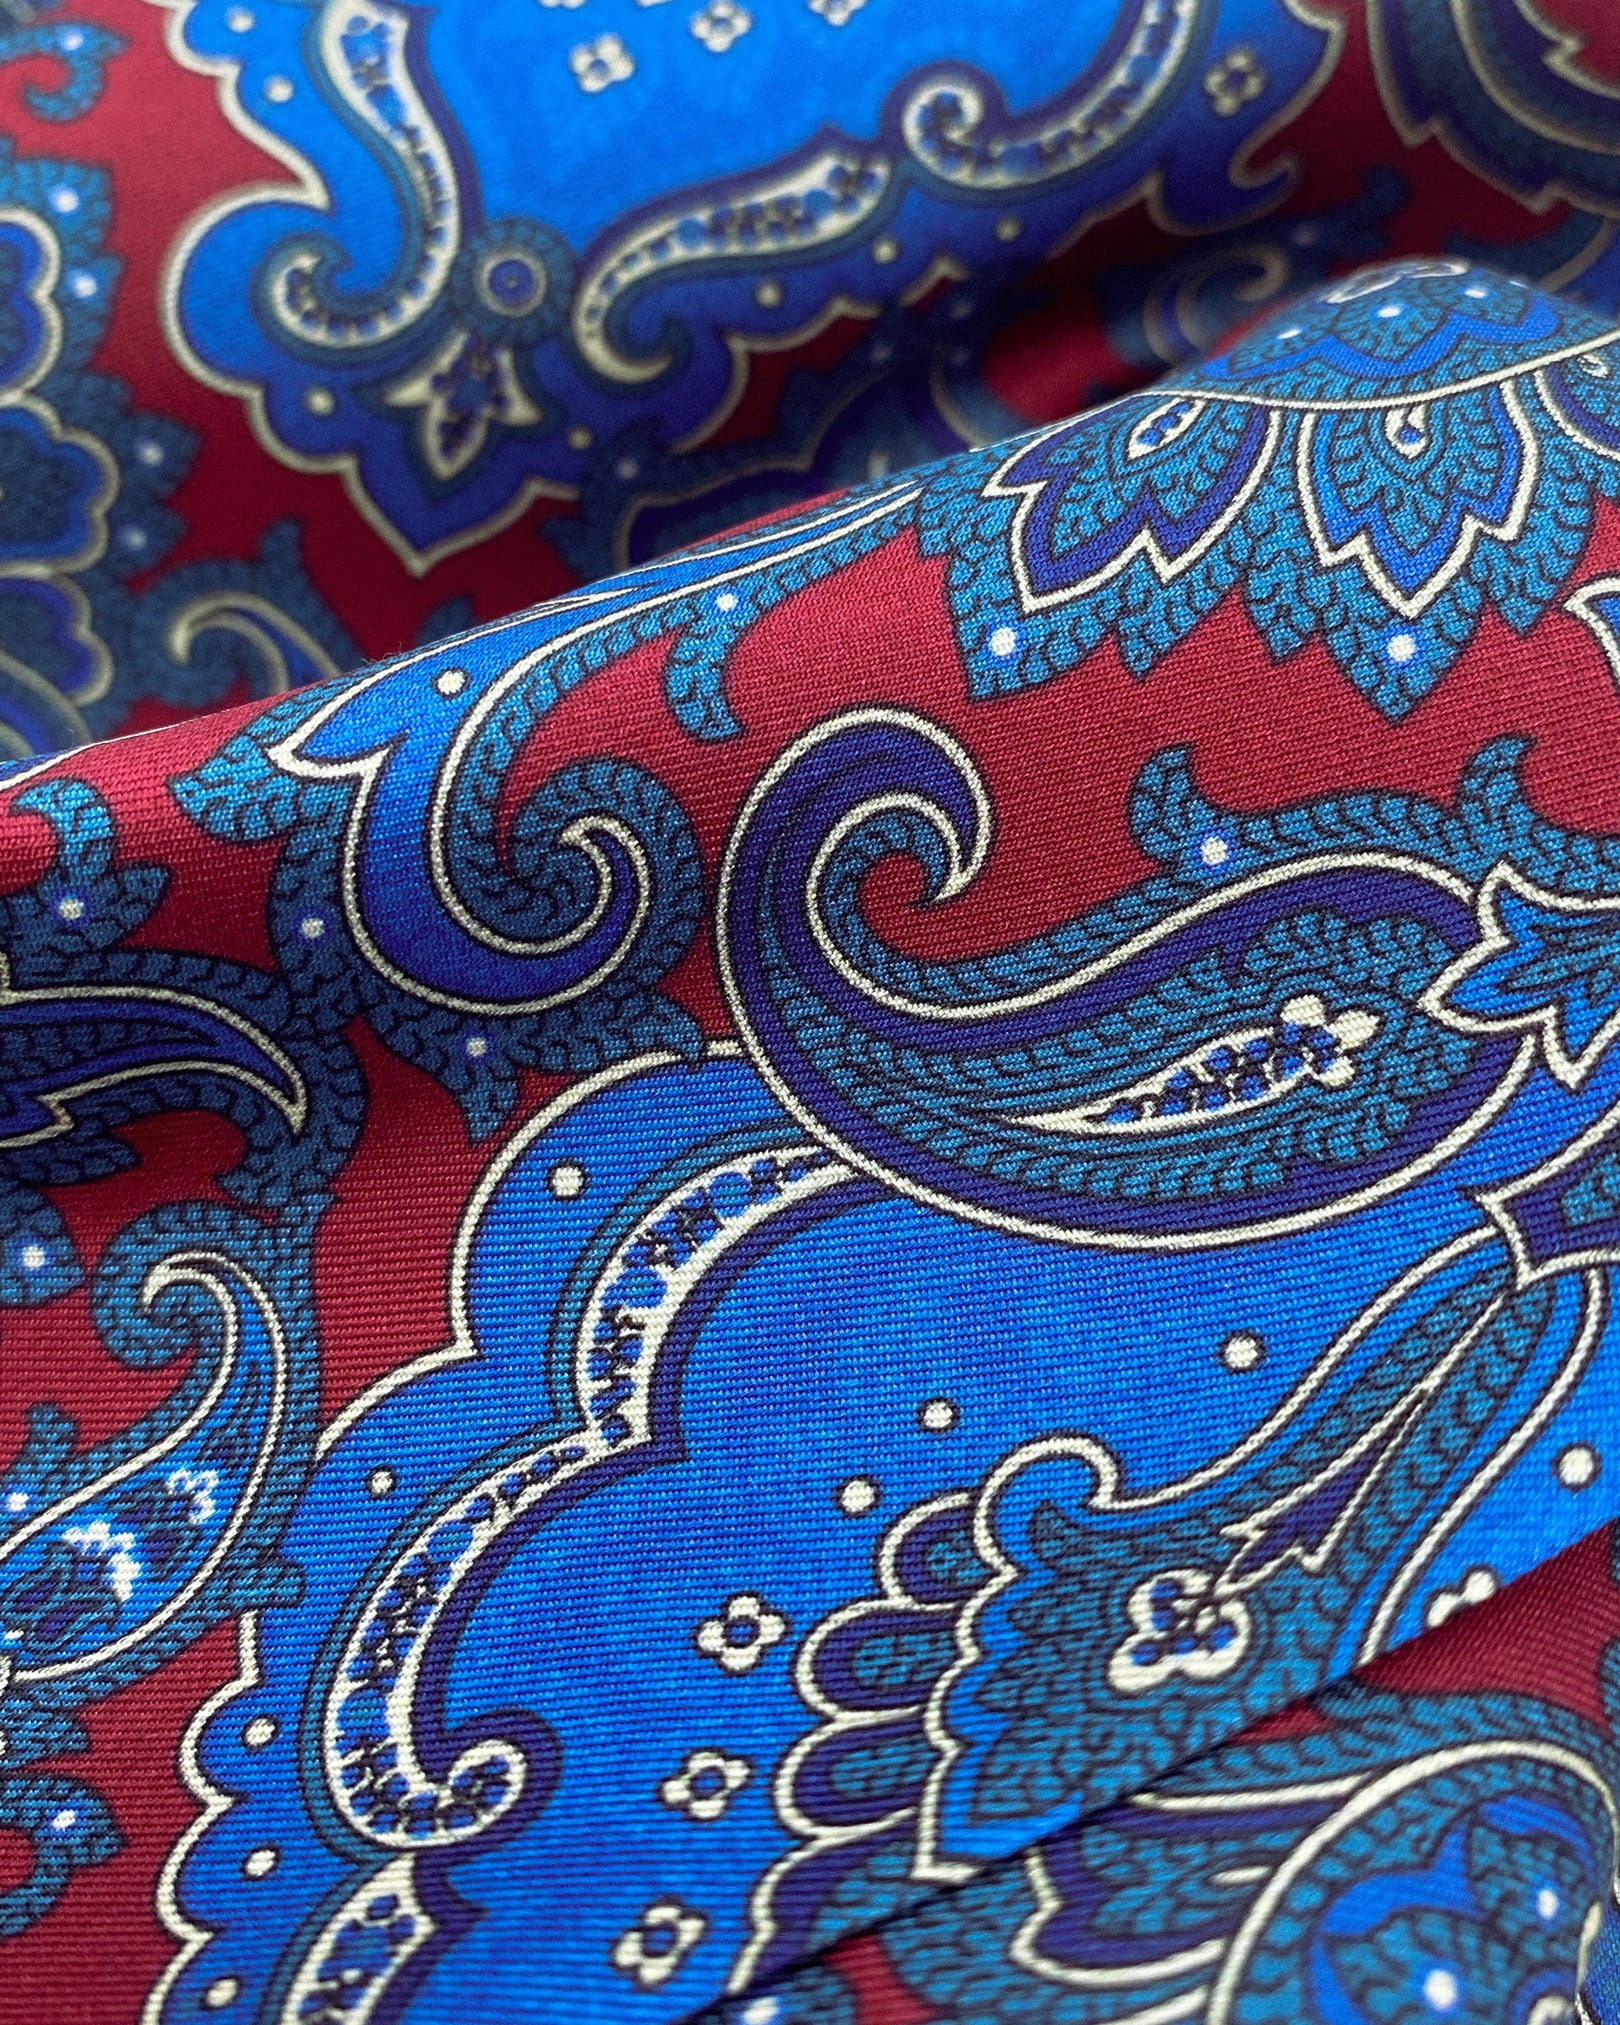 Ruffled close-up view of the 'Dean' silk scarf, presenting a closer view of the swirls of blue paisley intertwined with abstract floral patterns and subtle lustre of the material.